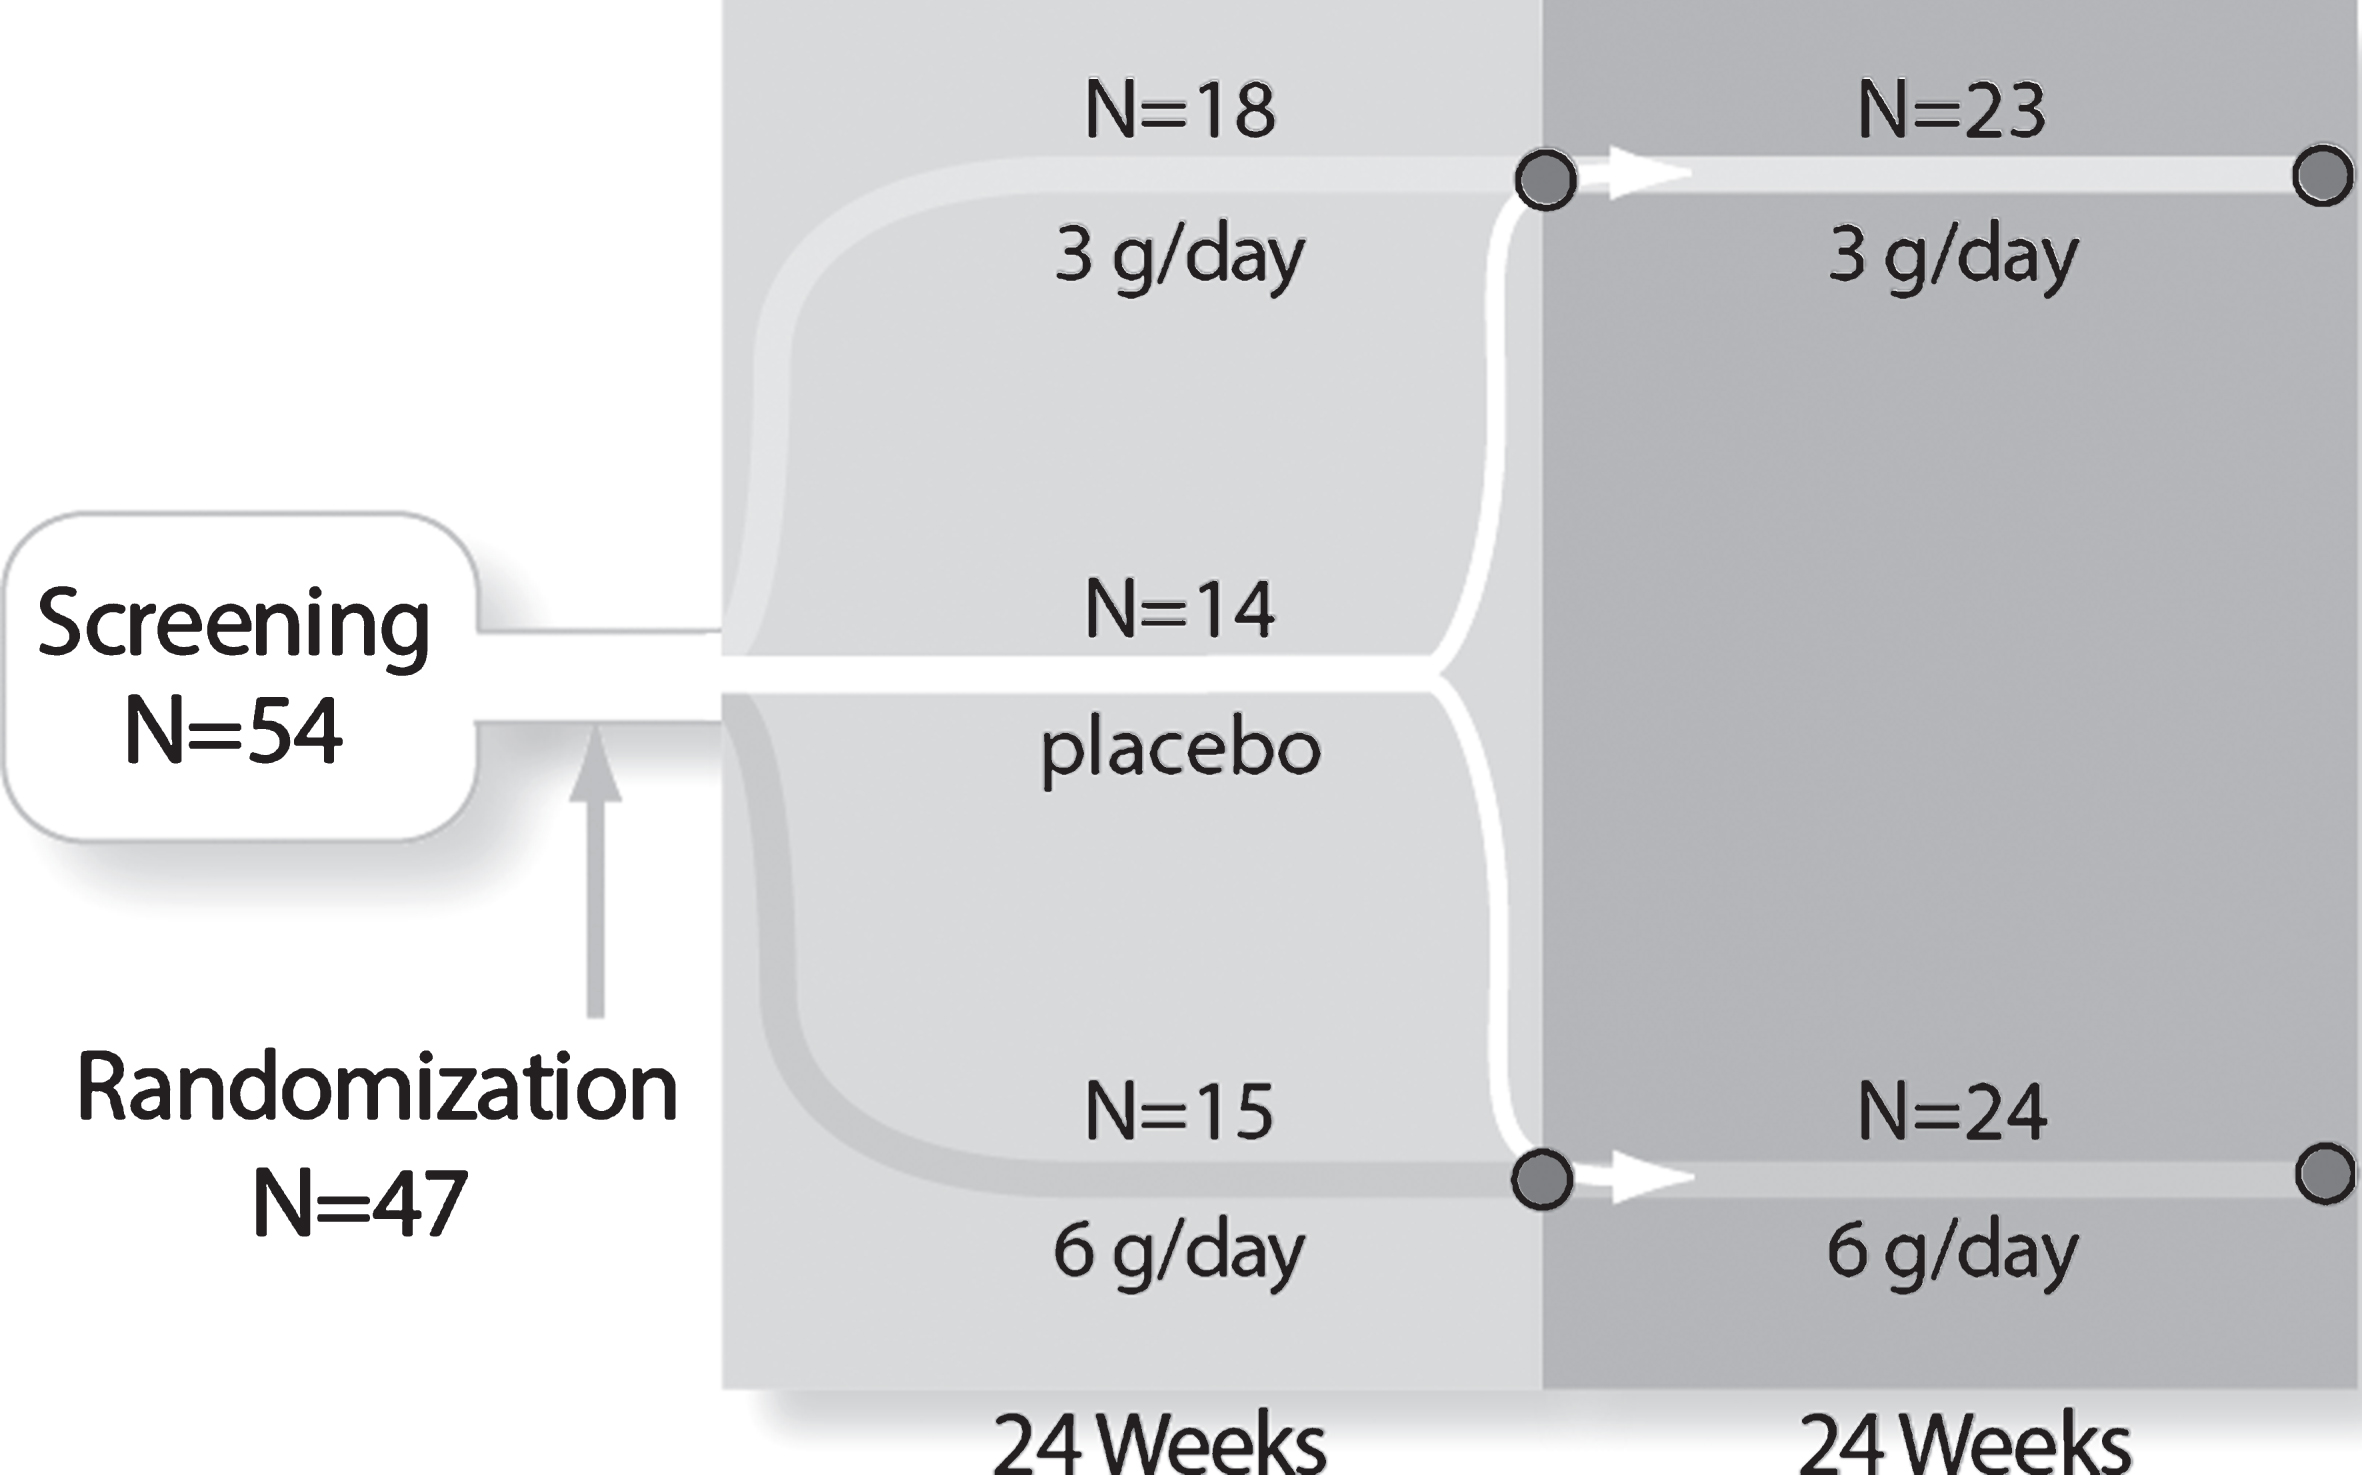 Study design and subject disposition. The randomized, double-blind, controlled study design and subject flow are shown. After stratification and randomization, the three groups received 24 weeks of treatment. At Week 24, 9 placebo subjects crossed over to 6 g/day to form a 24 subject combined 6 g/day group and 5 placebo subjects crossed over to the 3 g/day group to form a 23 subject combined 3 g/day group. The combined groups received an additional 24 weeks of treatment for a total of 48 weeks of exposure.